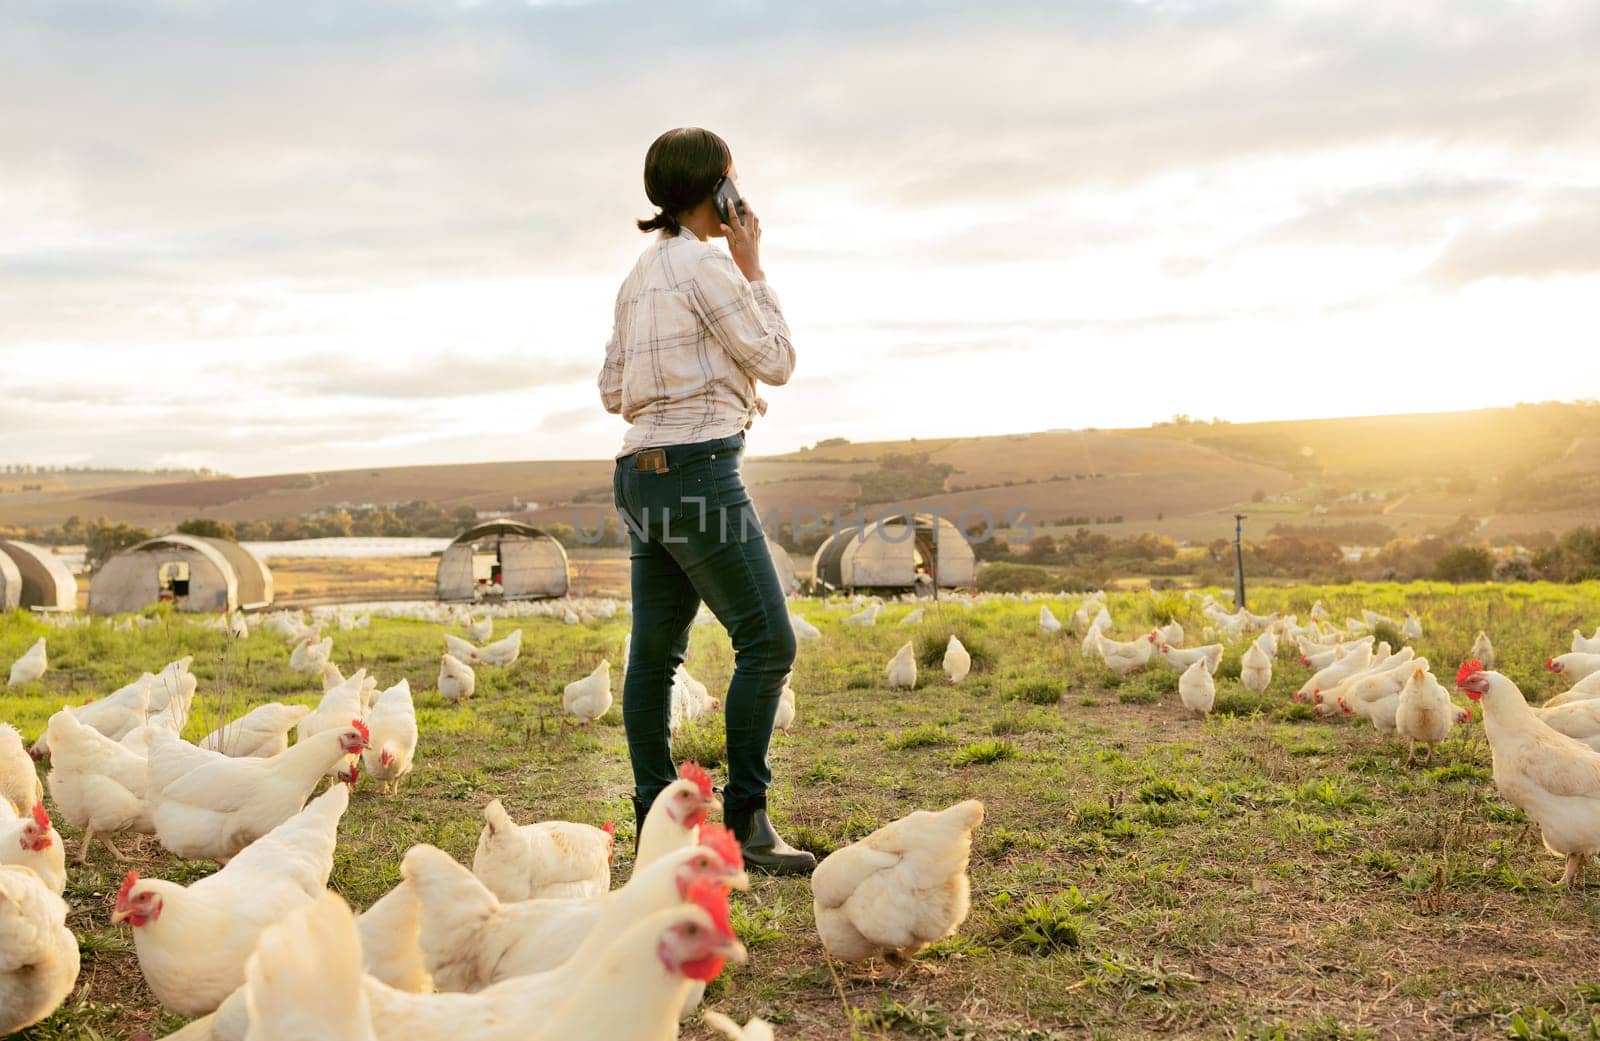 Agriculture, chicken and phone of farm woman in countryside with 5g communication for poultry business. Grass, animals and farmer on mobile talk on field with rooster livestock in South Africa